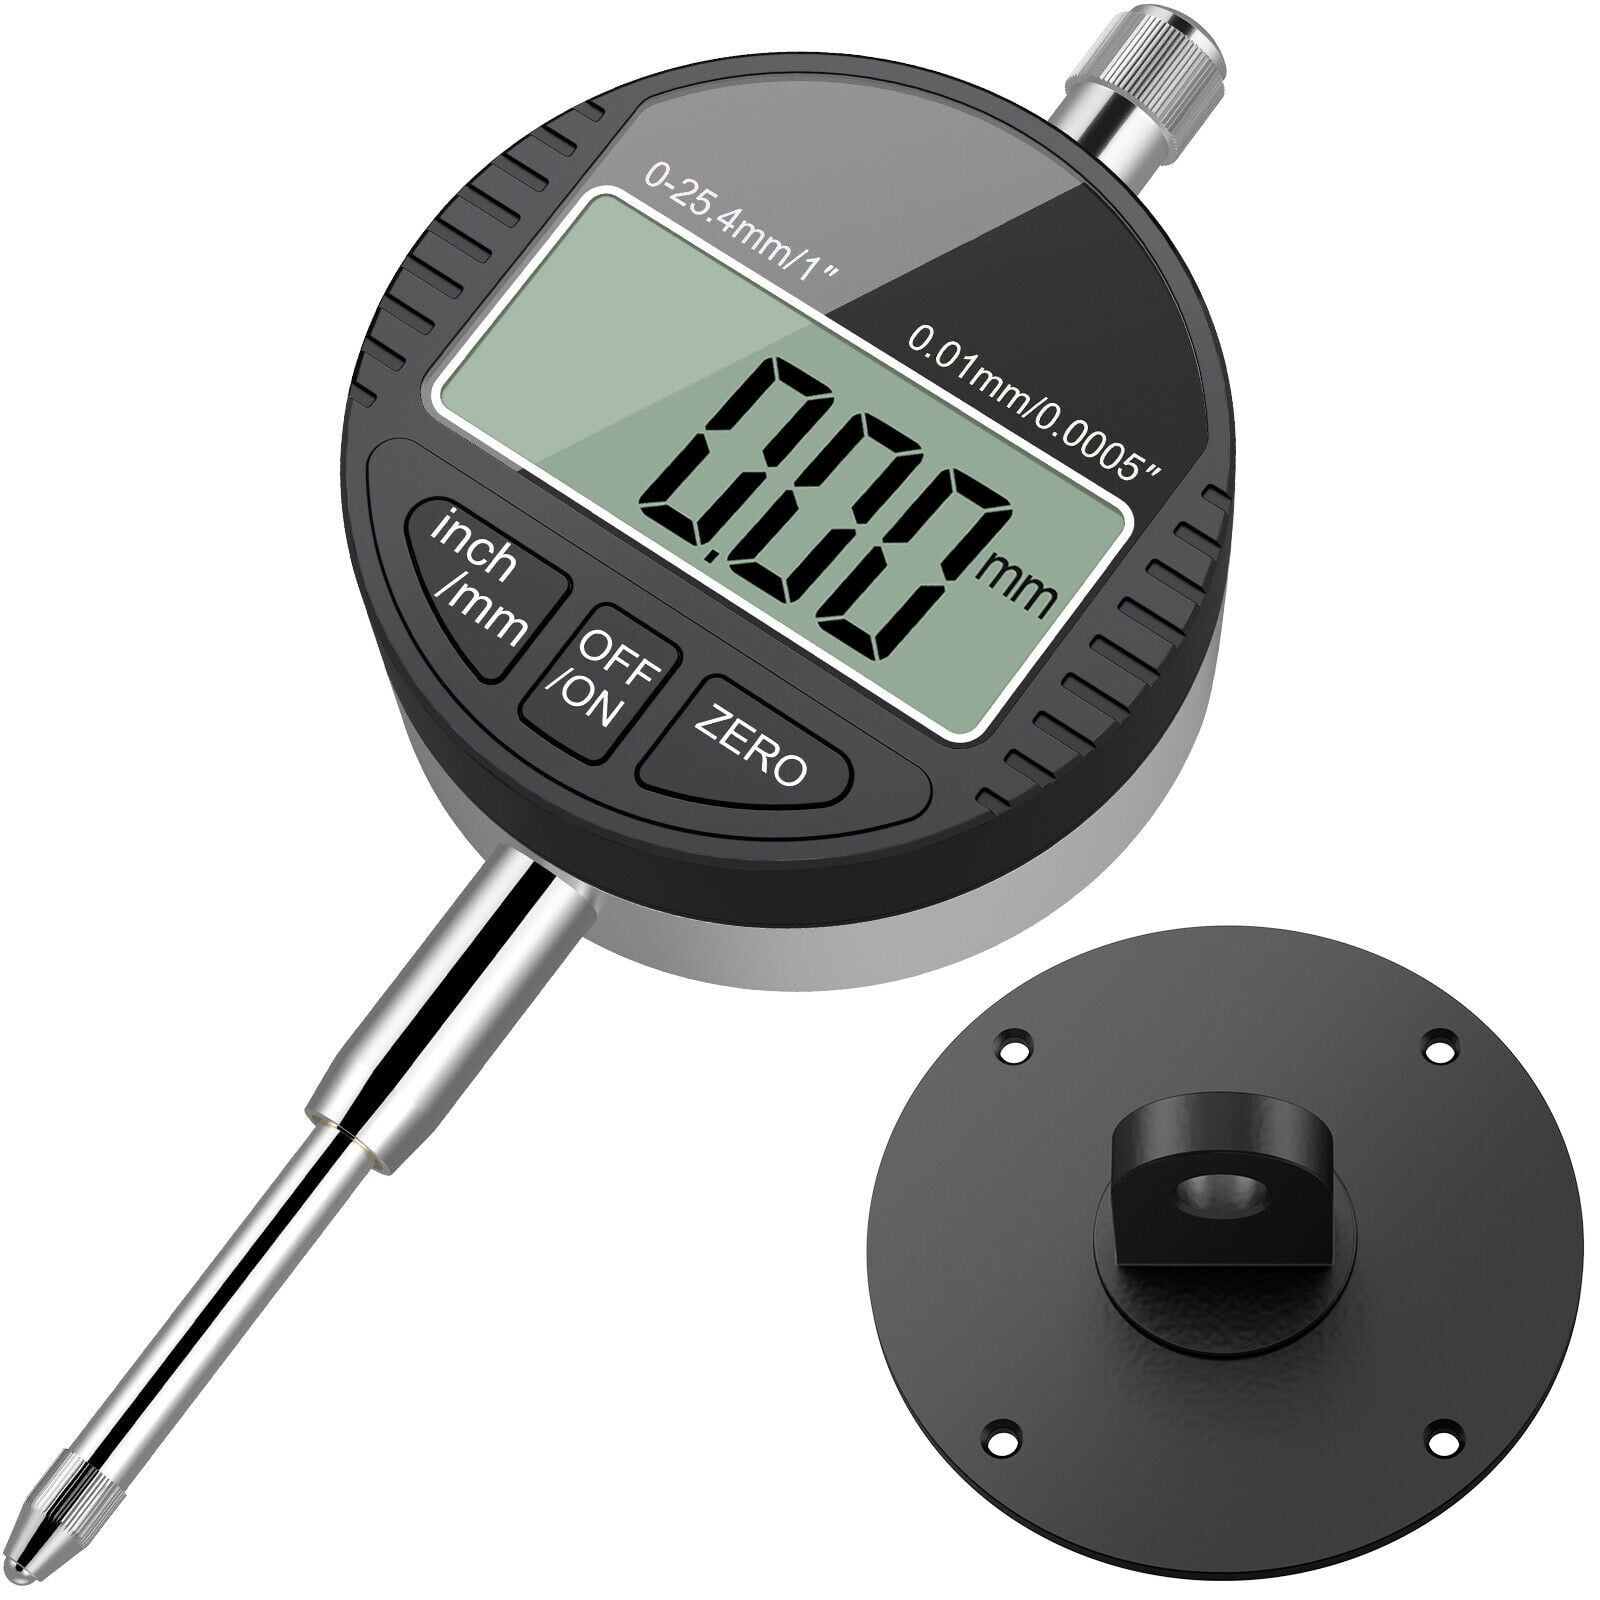 Digital Dial Indicator,Dial Indicator Probe,0-12.7Mm/0.5 Clock DTI 0.01Mm/0.0005 Test Dial Indicator Stable and Durable with High Accuracy. Metal Integrated Structure 